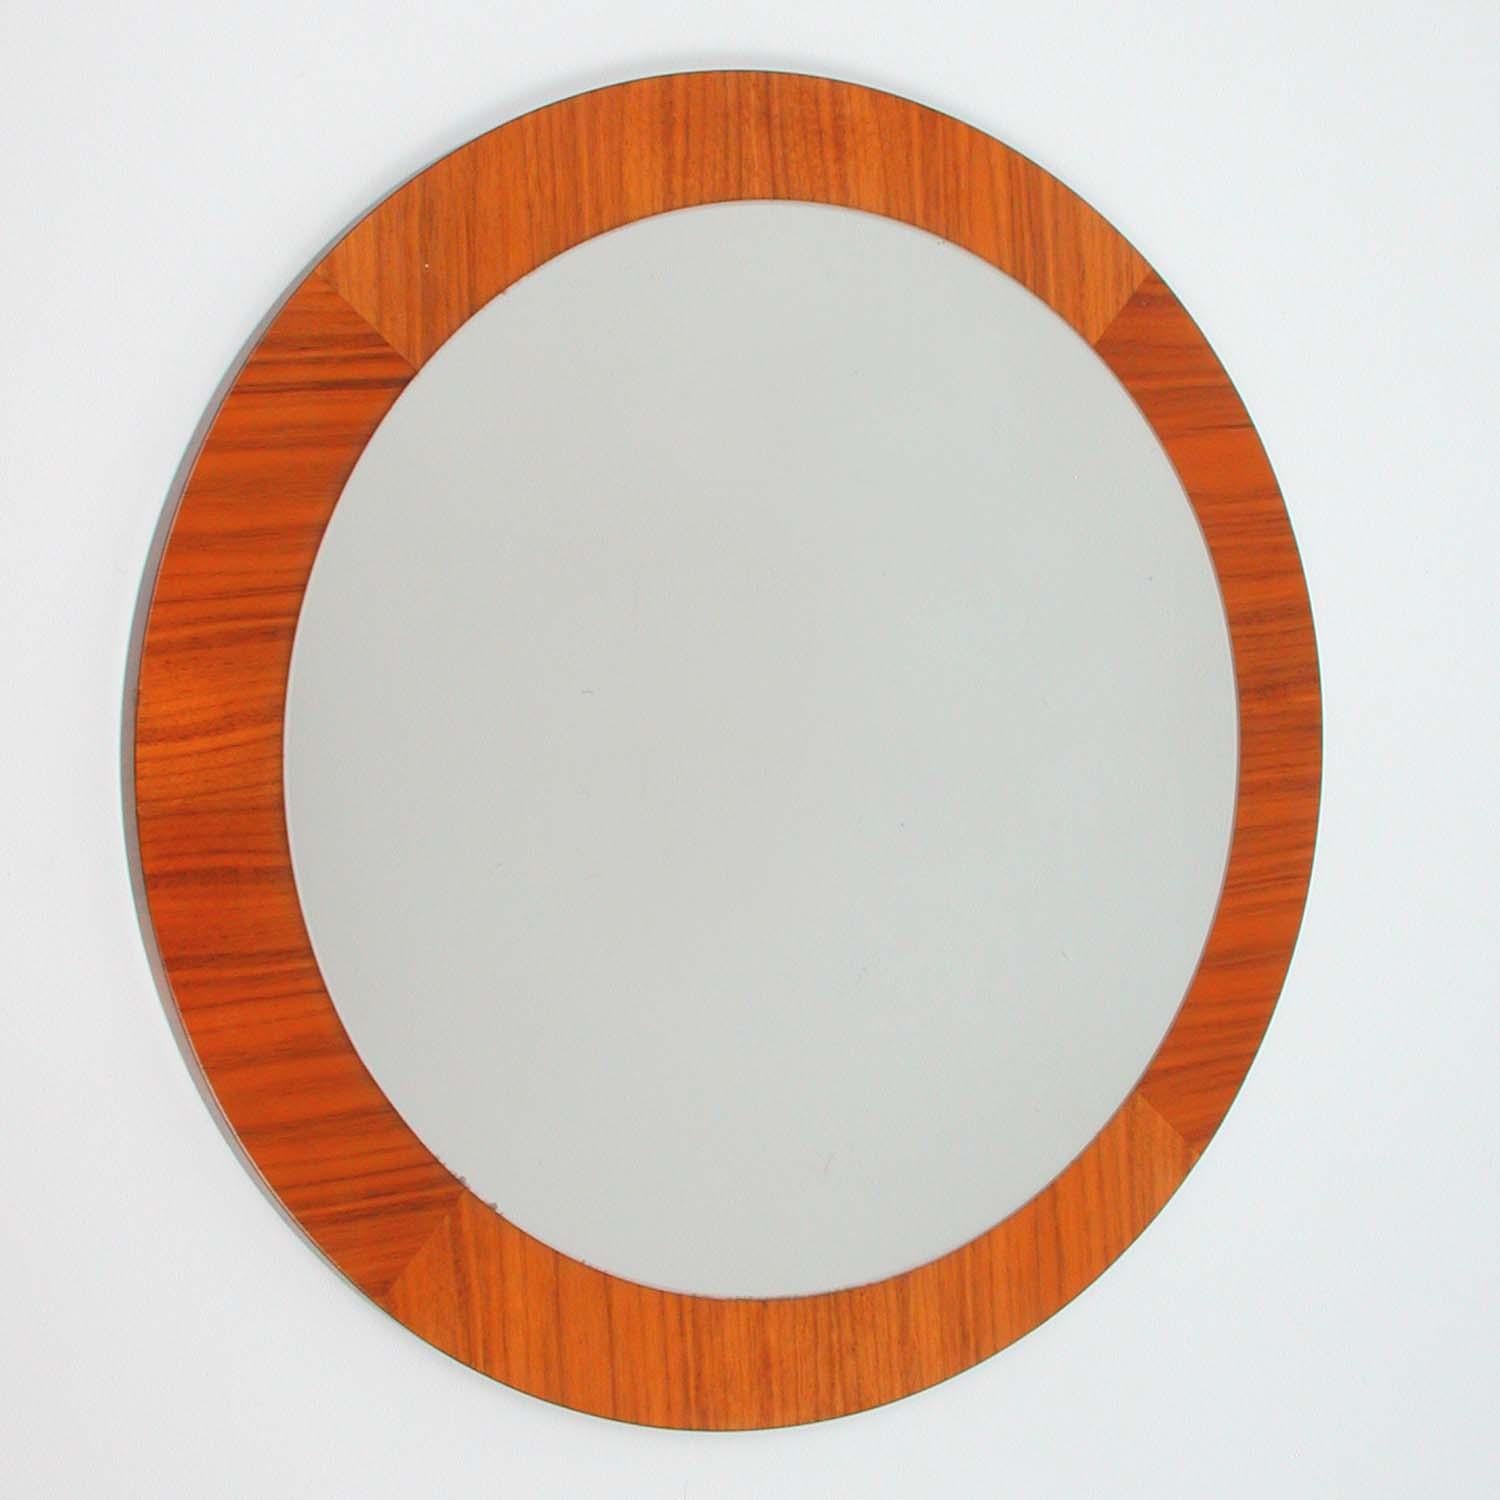 This vintage round wall mirror was designed and manufactured in Denmark in the mid-century era. It features a teak frame and mirror glass.

Measures: Total diameter is 19.7